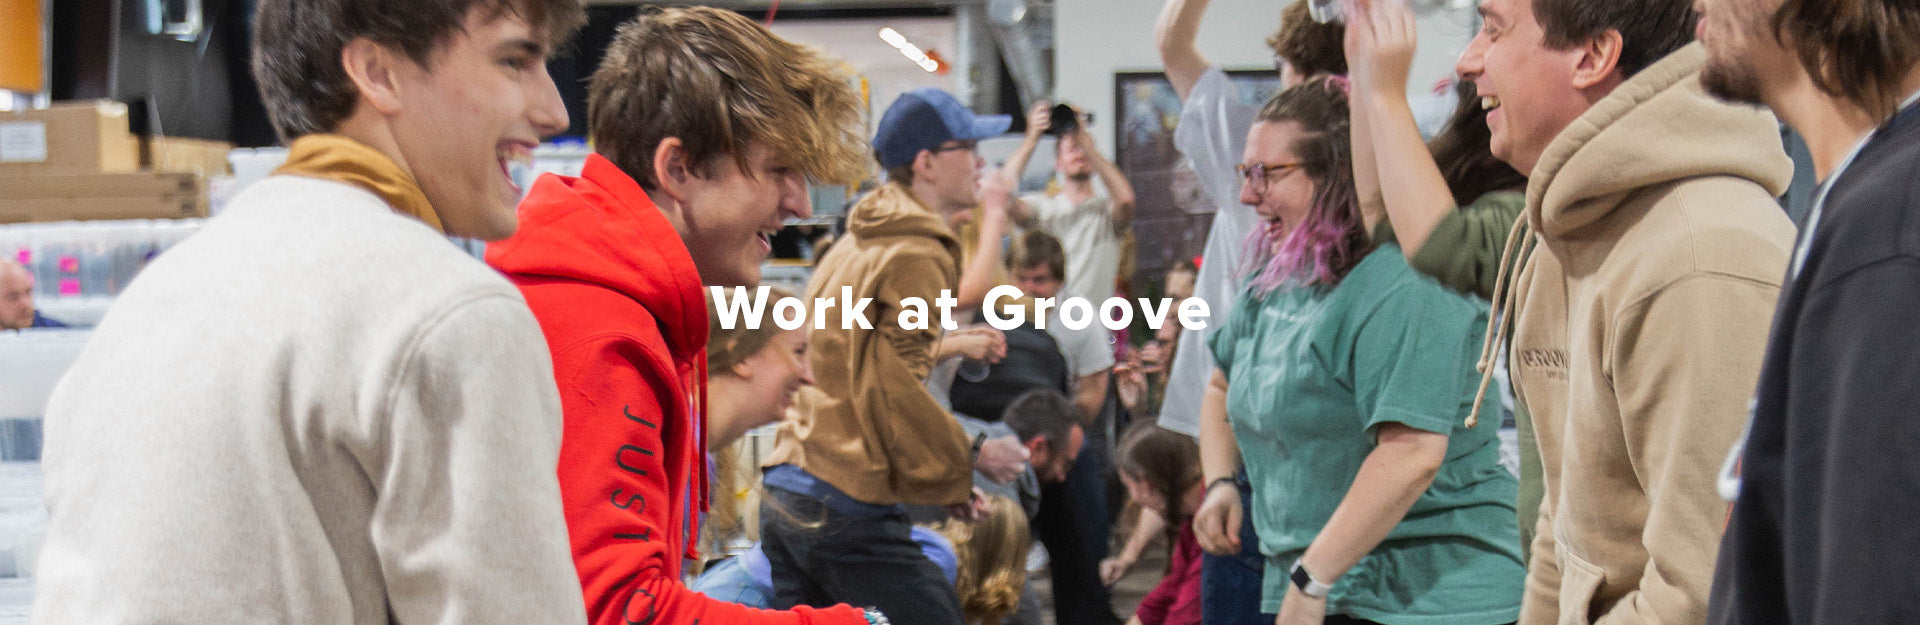 Groove employees laughing